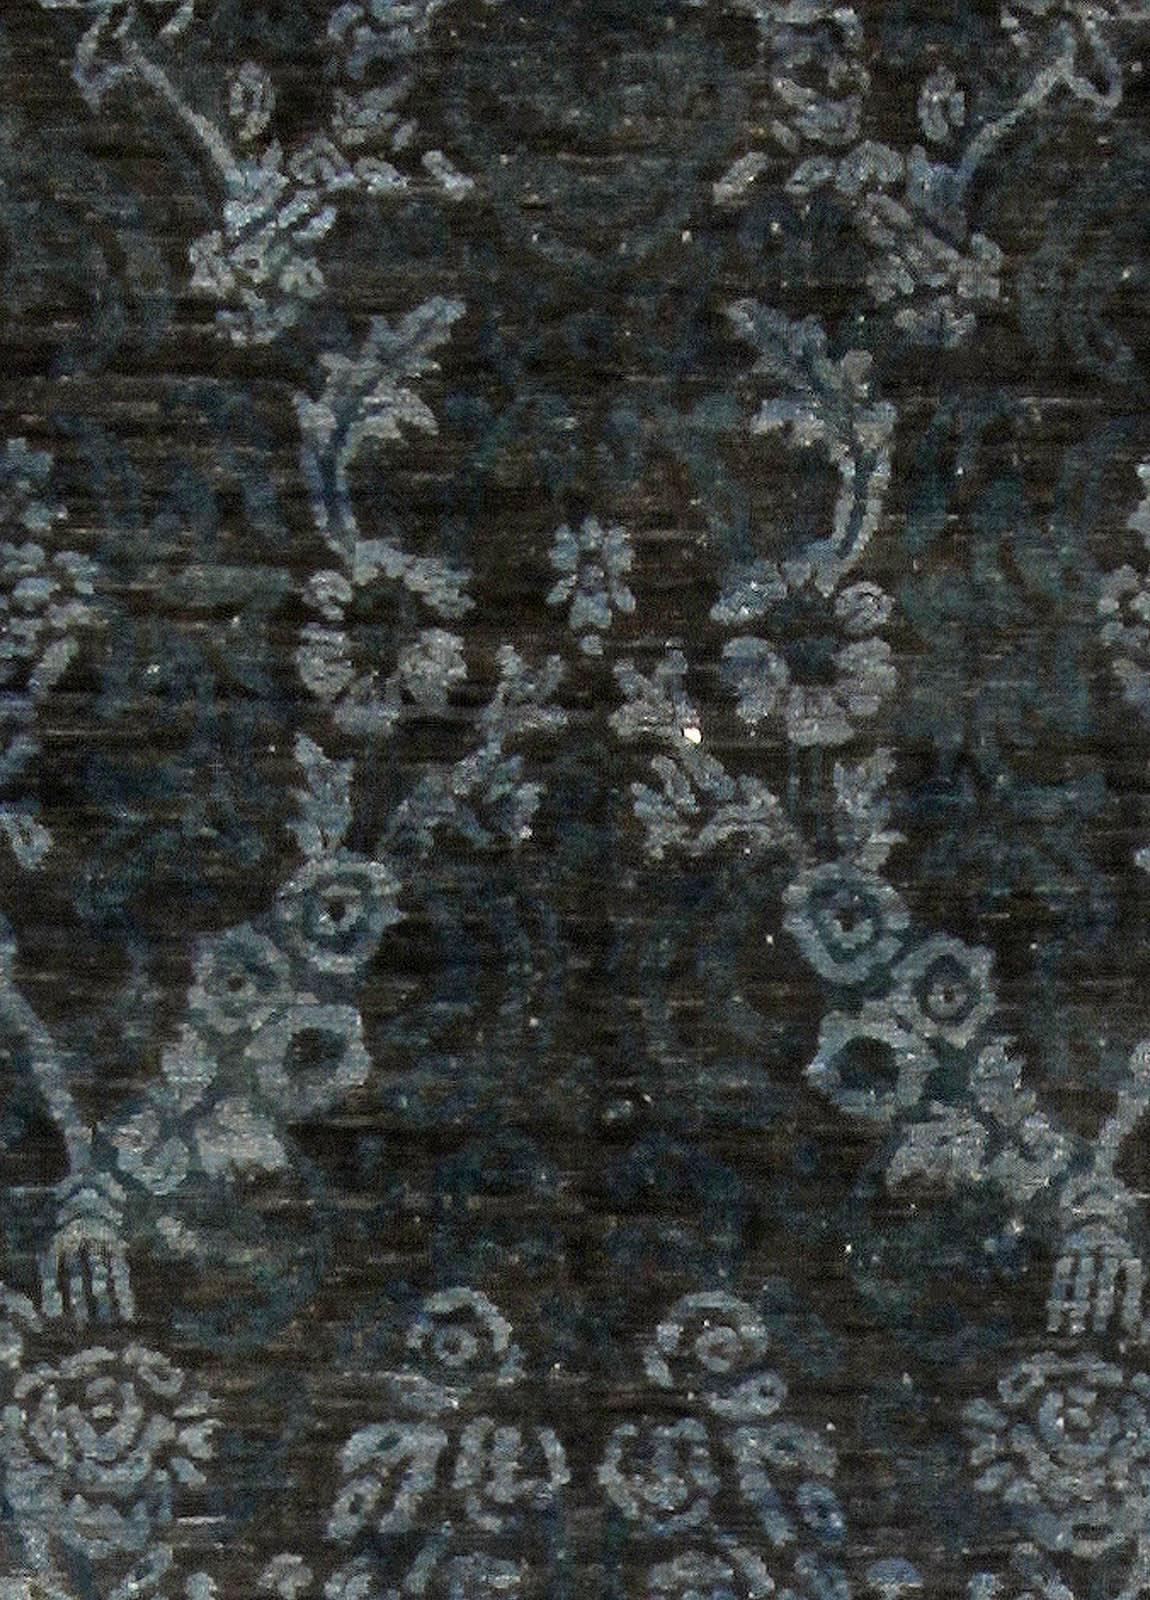 Contemporary Damask navy and blue handmade wool rug by Doris Leslie Blau
Size: 7'10